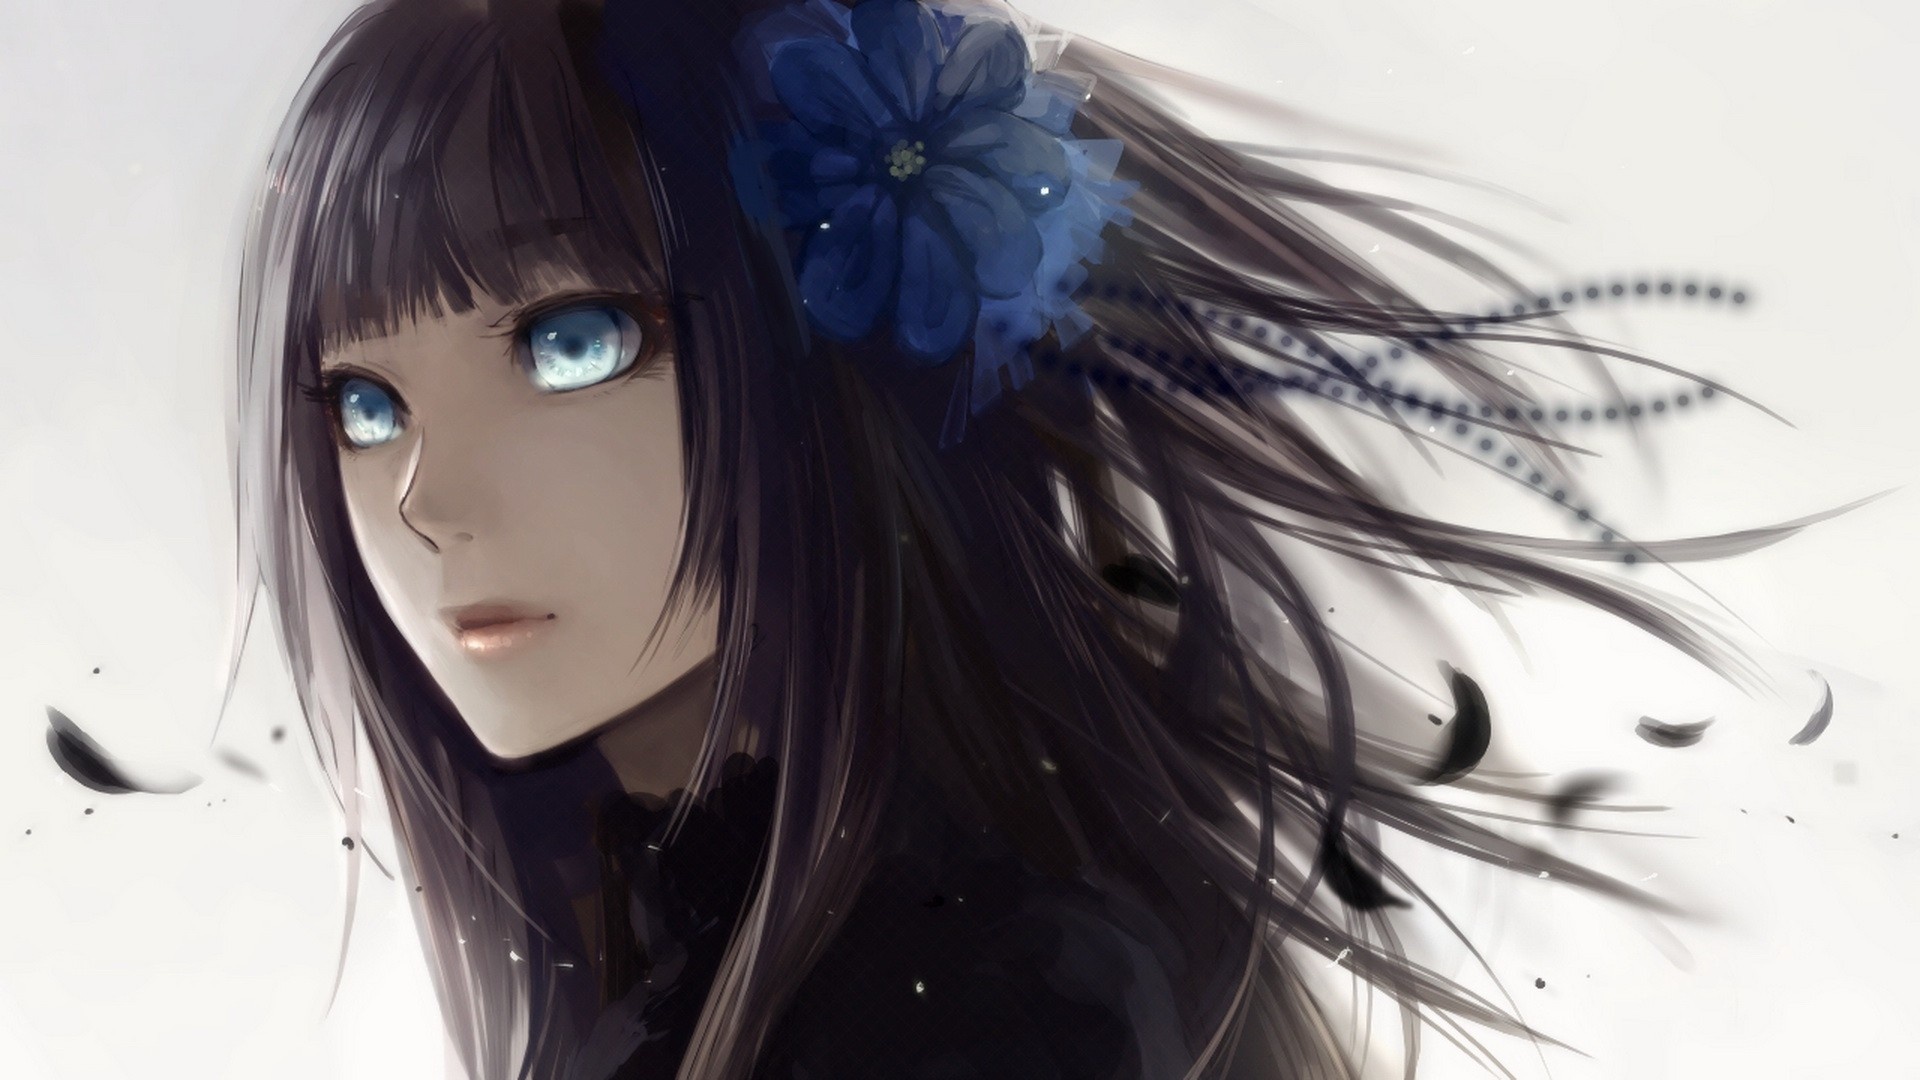 Anime Girl With Black Hair And Blue Eyes Wallpapers 1920x1080 387292